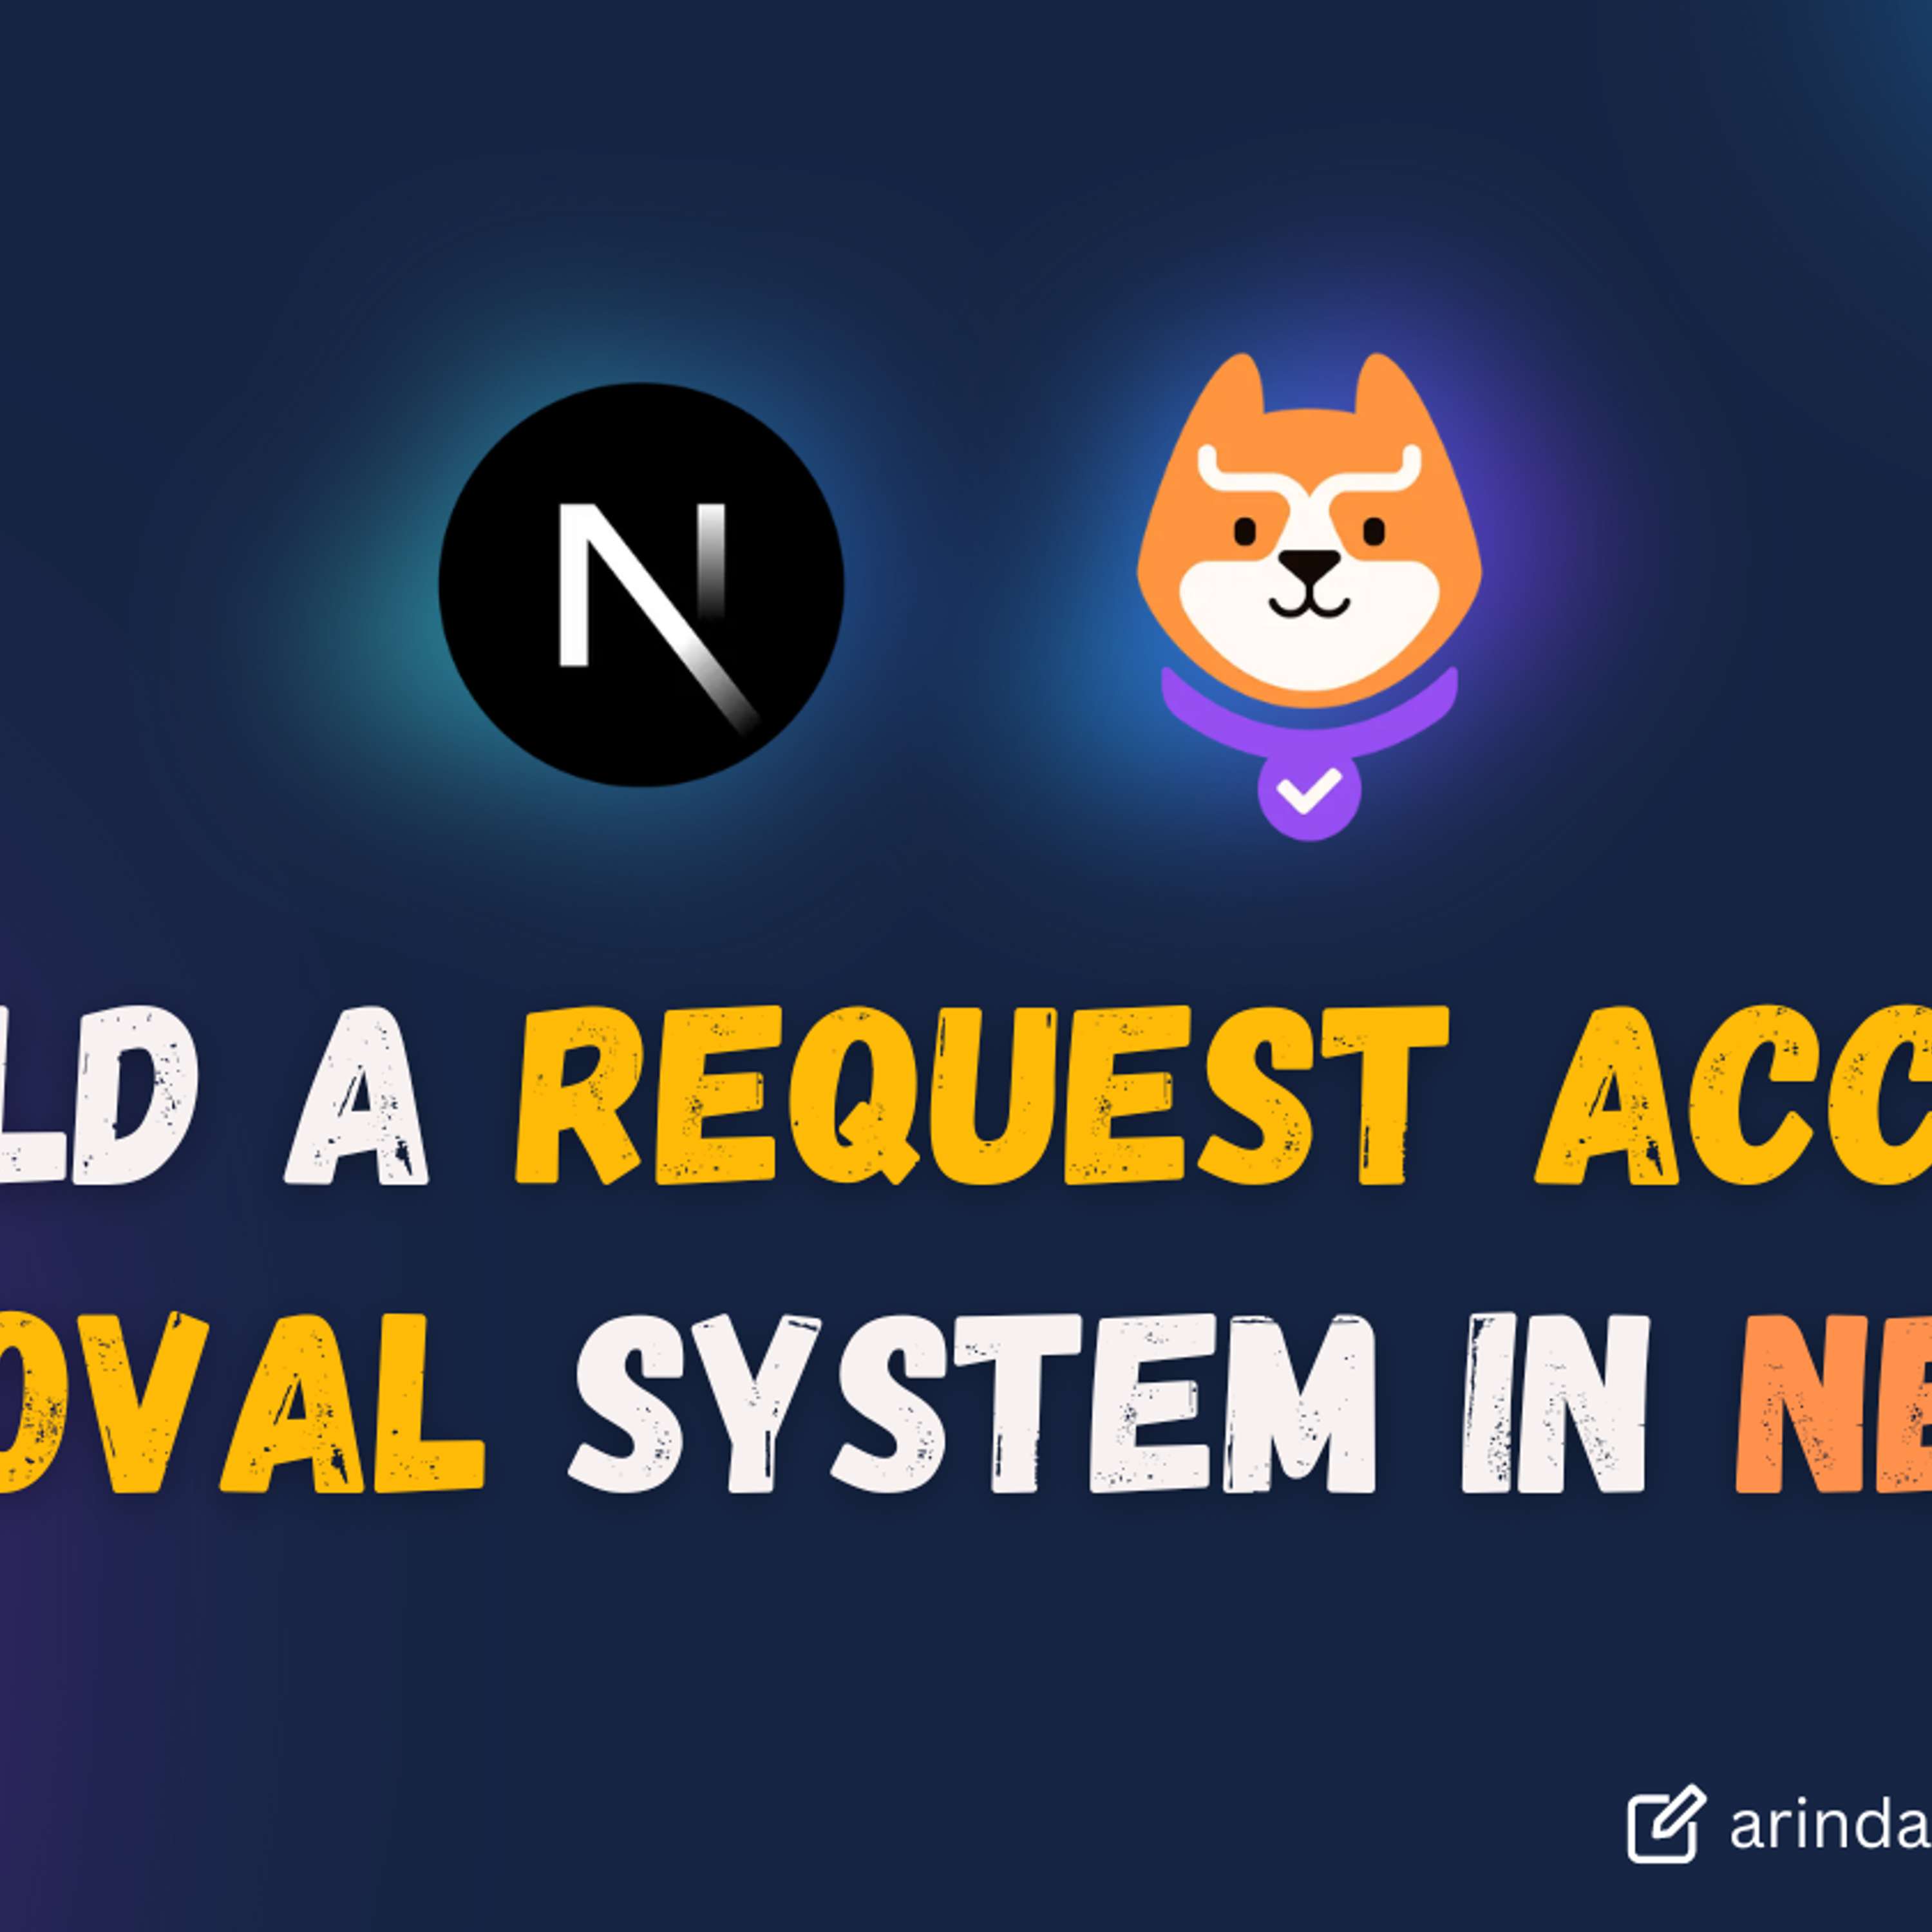 How to Build a Request Access Approval System Using Next.js